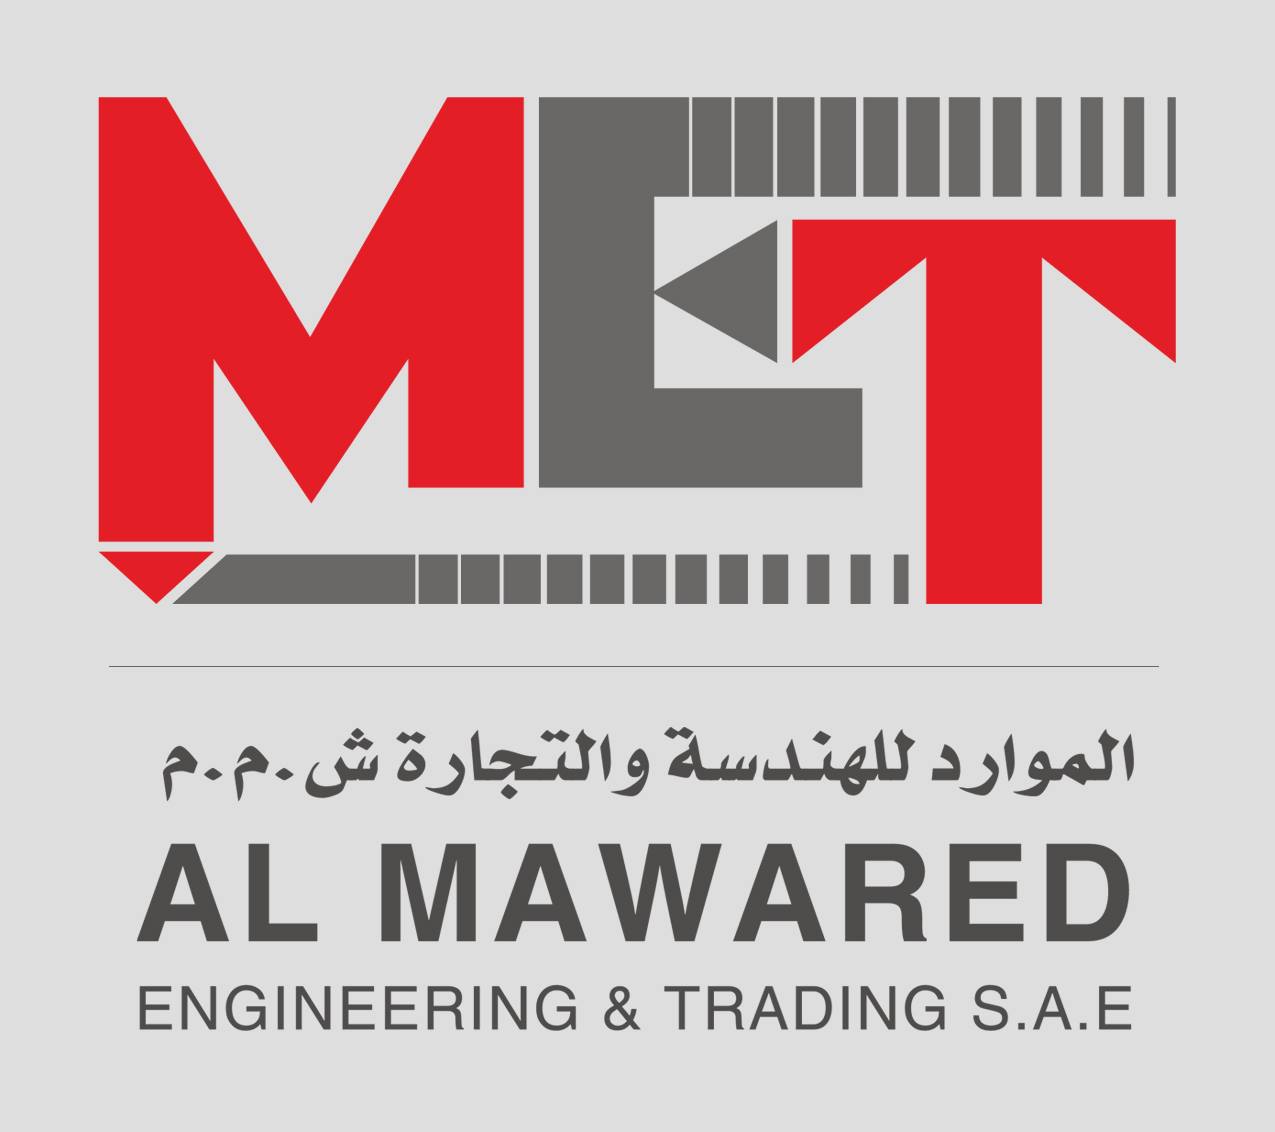 ALMAWARED ENGINEERING AND TRADING S.A.E (MET) - logo